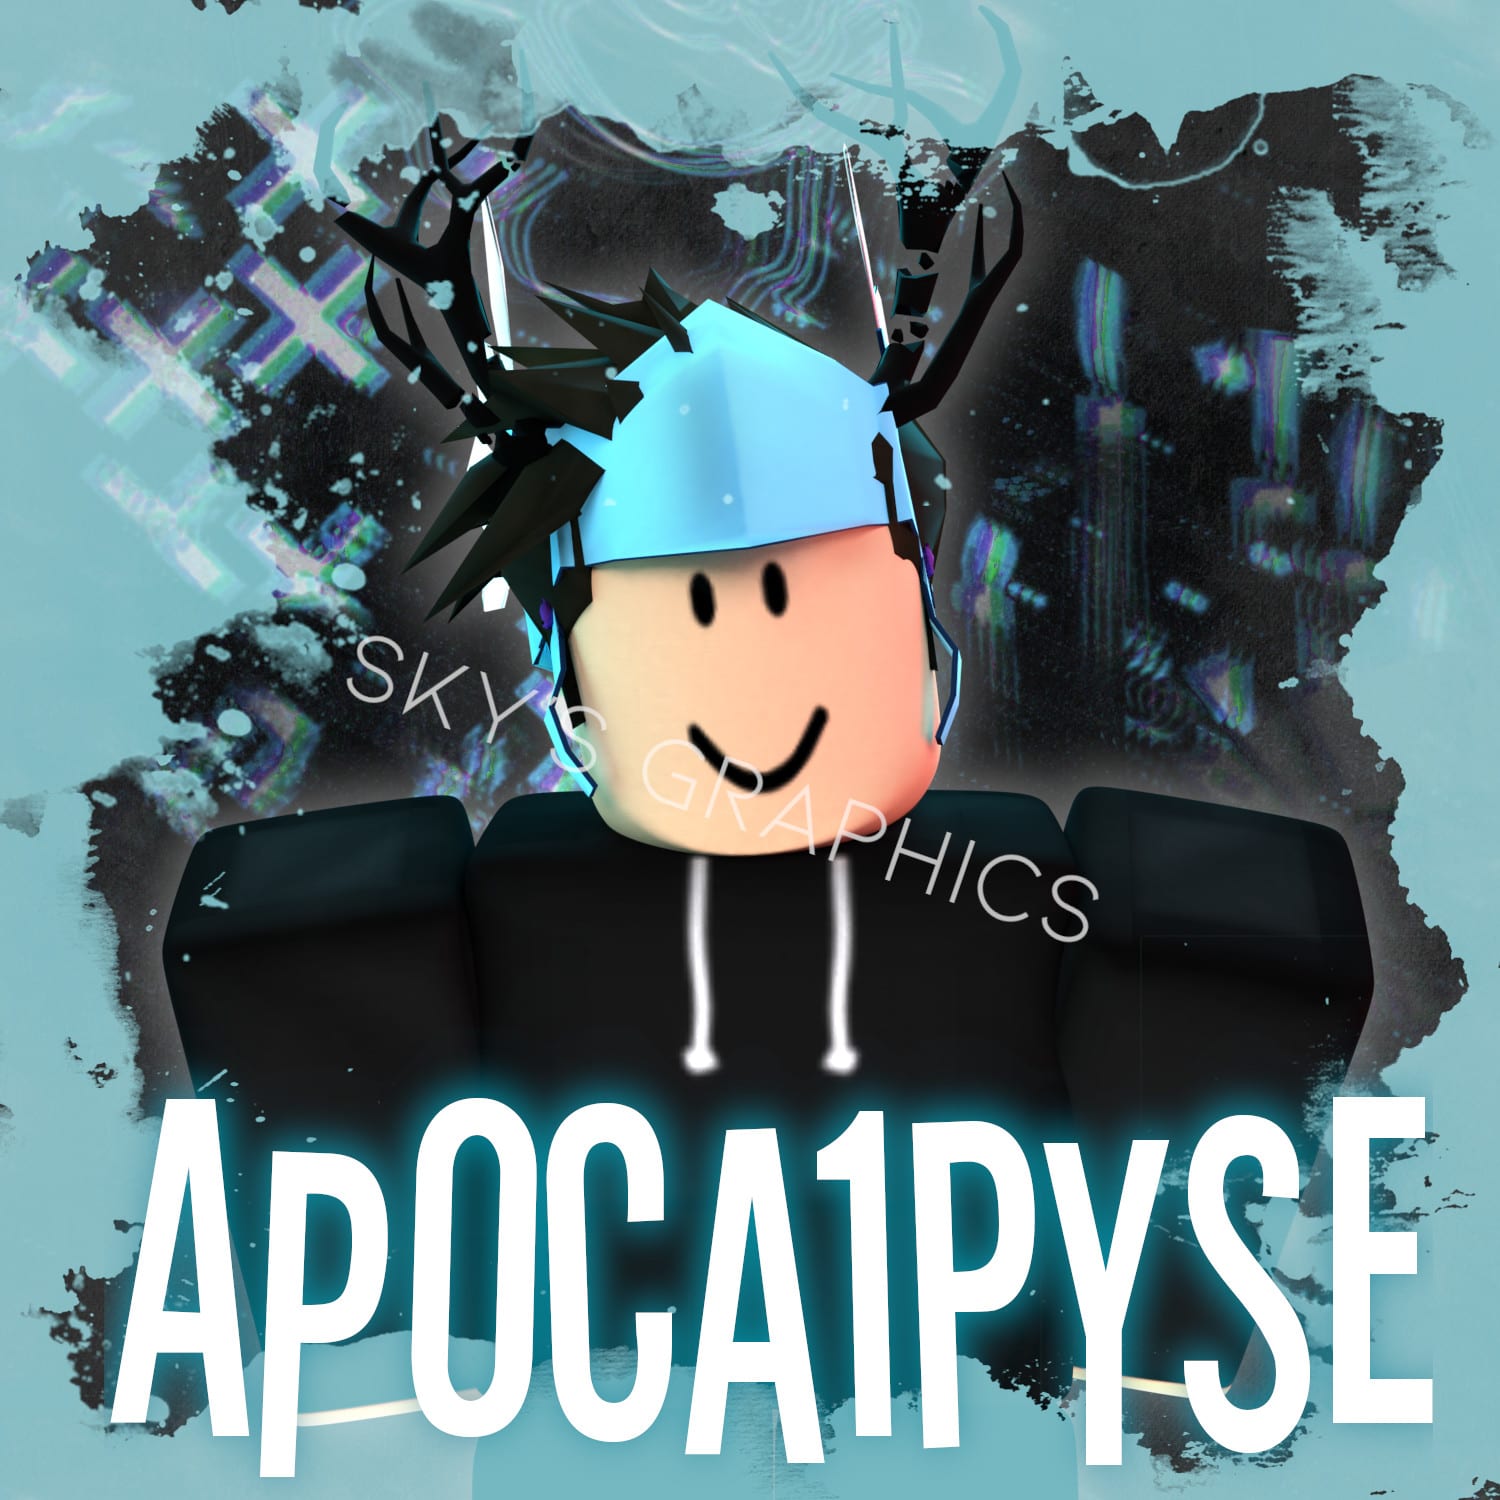 Make A Professional Roblox Gfx Of Your Character By Skiiess - gfx apps for roblox